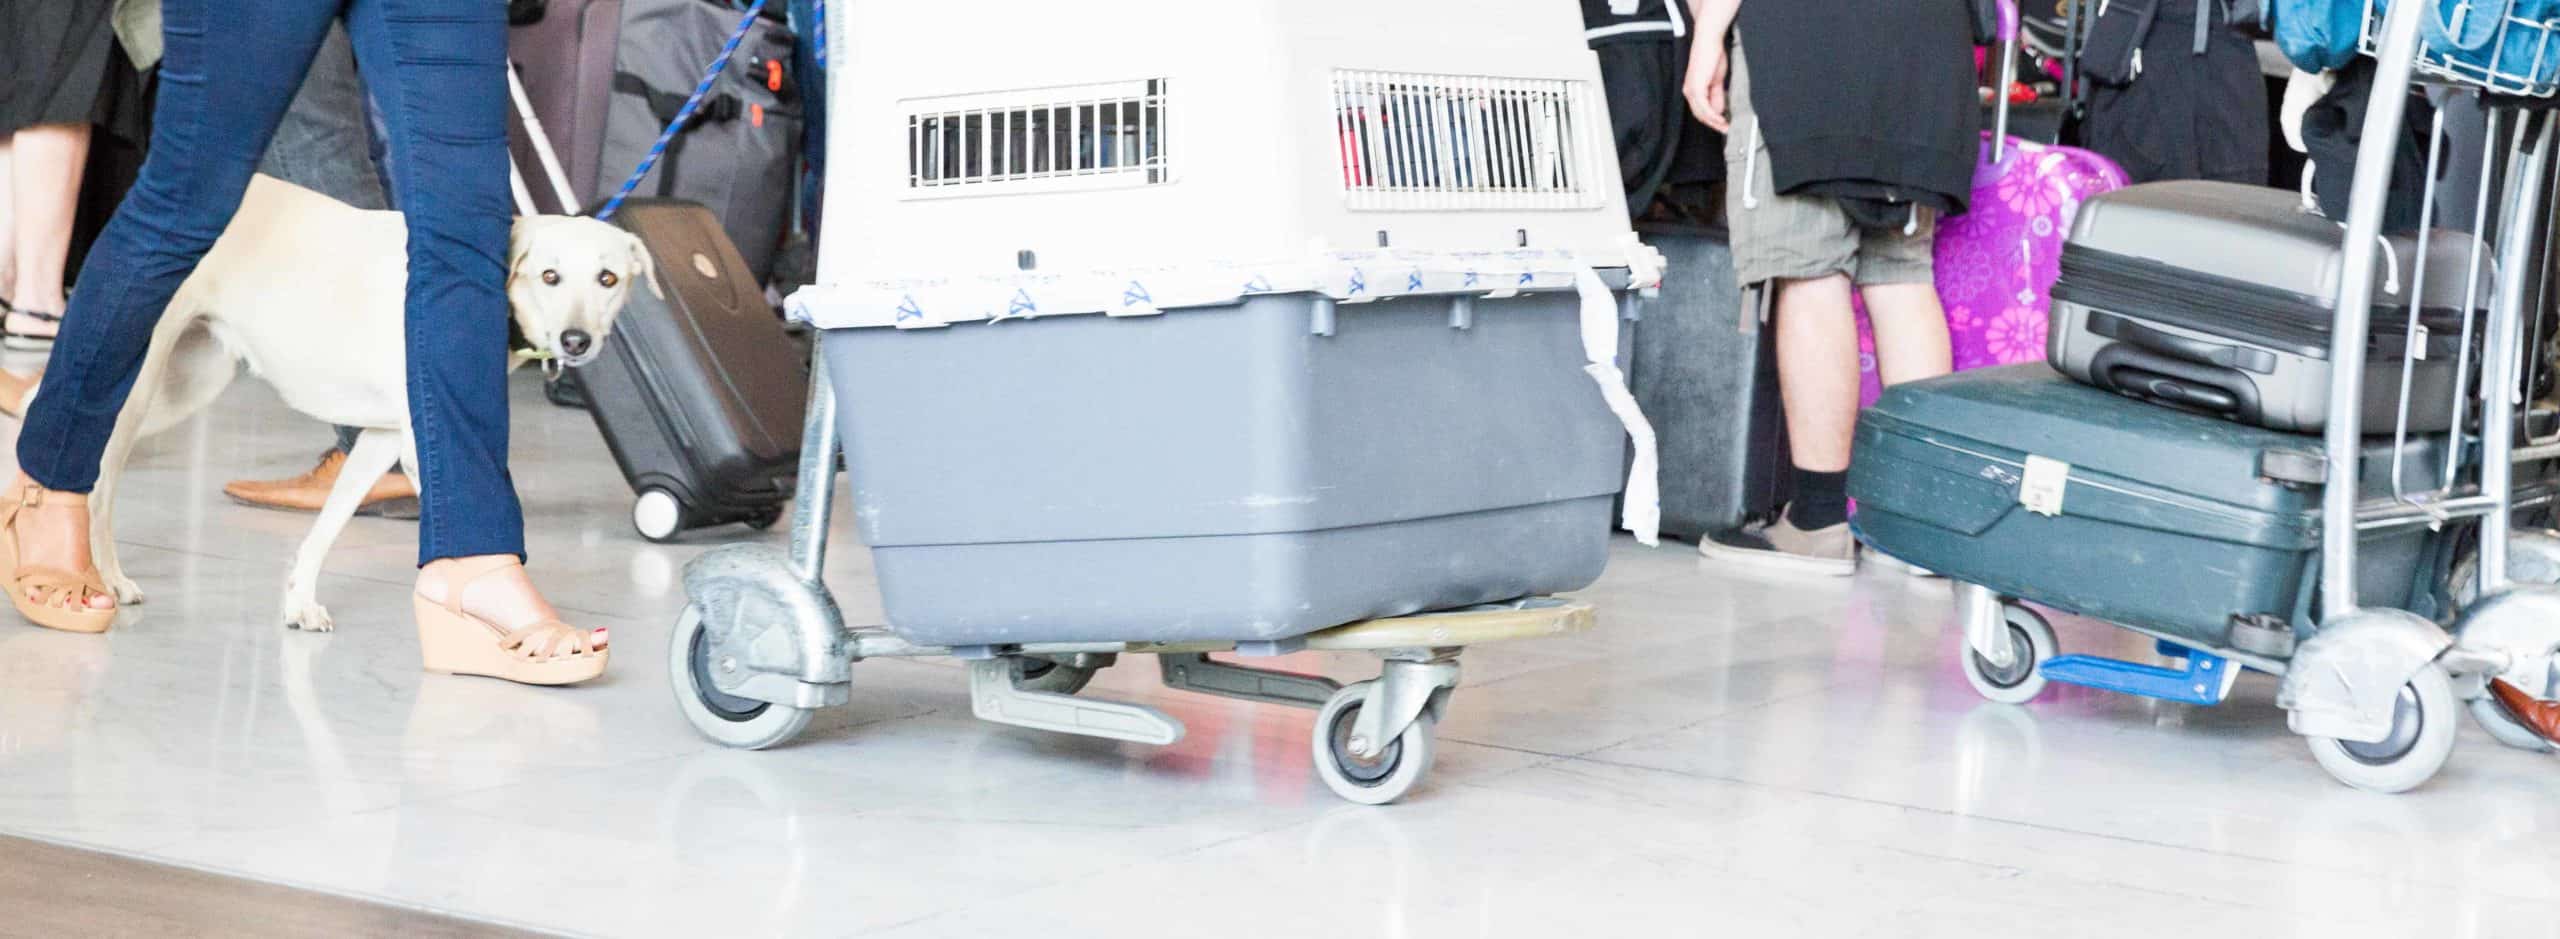 Animal transporter takes dog through airport. If you love animals, consider an animal job such as transporter, veterinarian, trainer, zookeeper, forest ranger, or wildlife biologist.